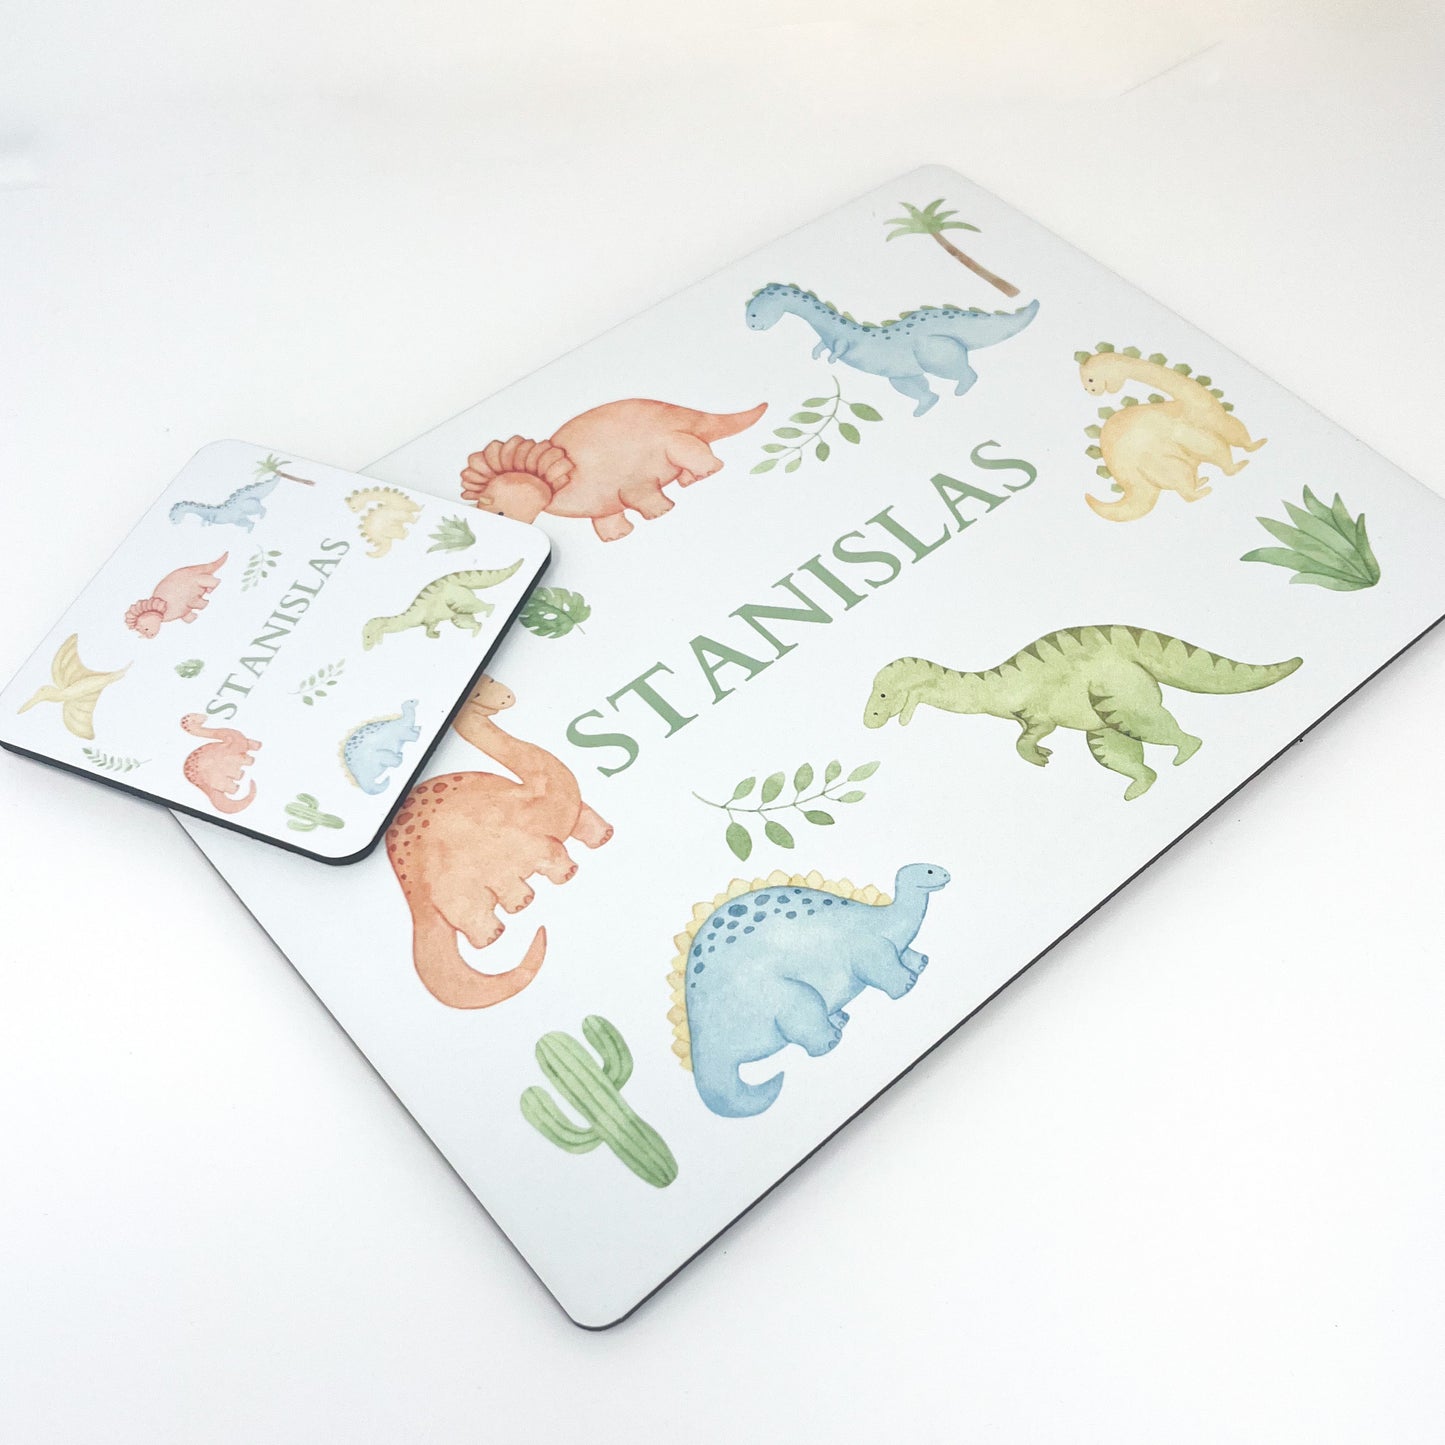 Children’s Personalised Placemat and Coaster Set - Dinosaurs Design